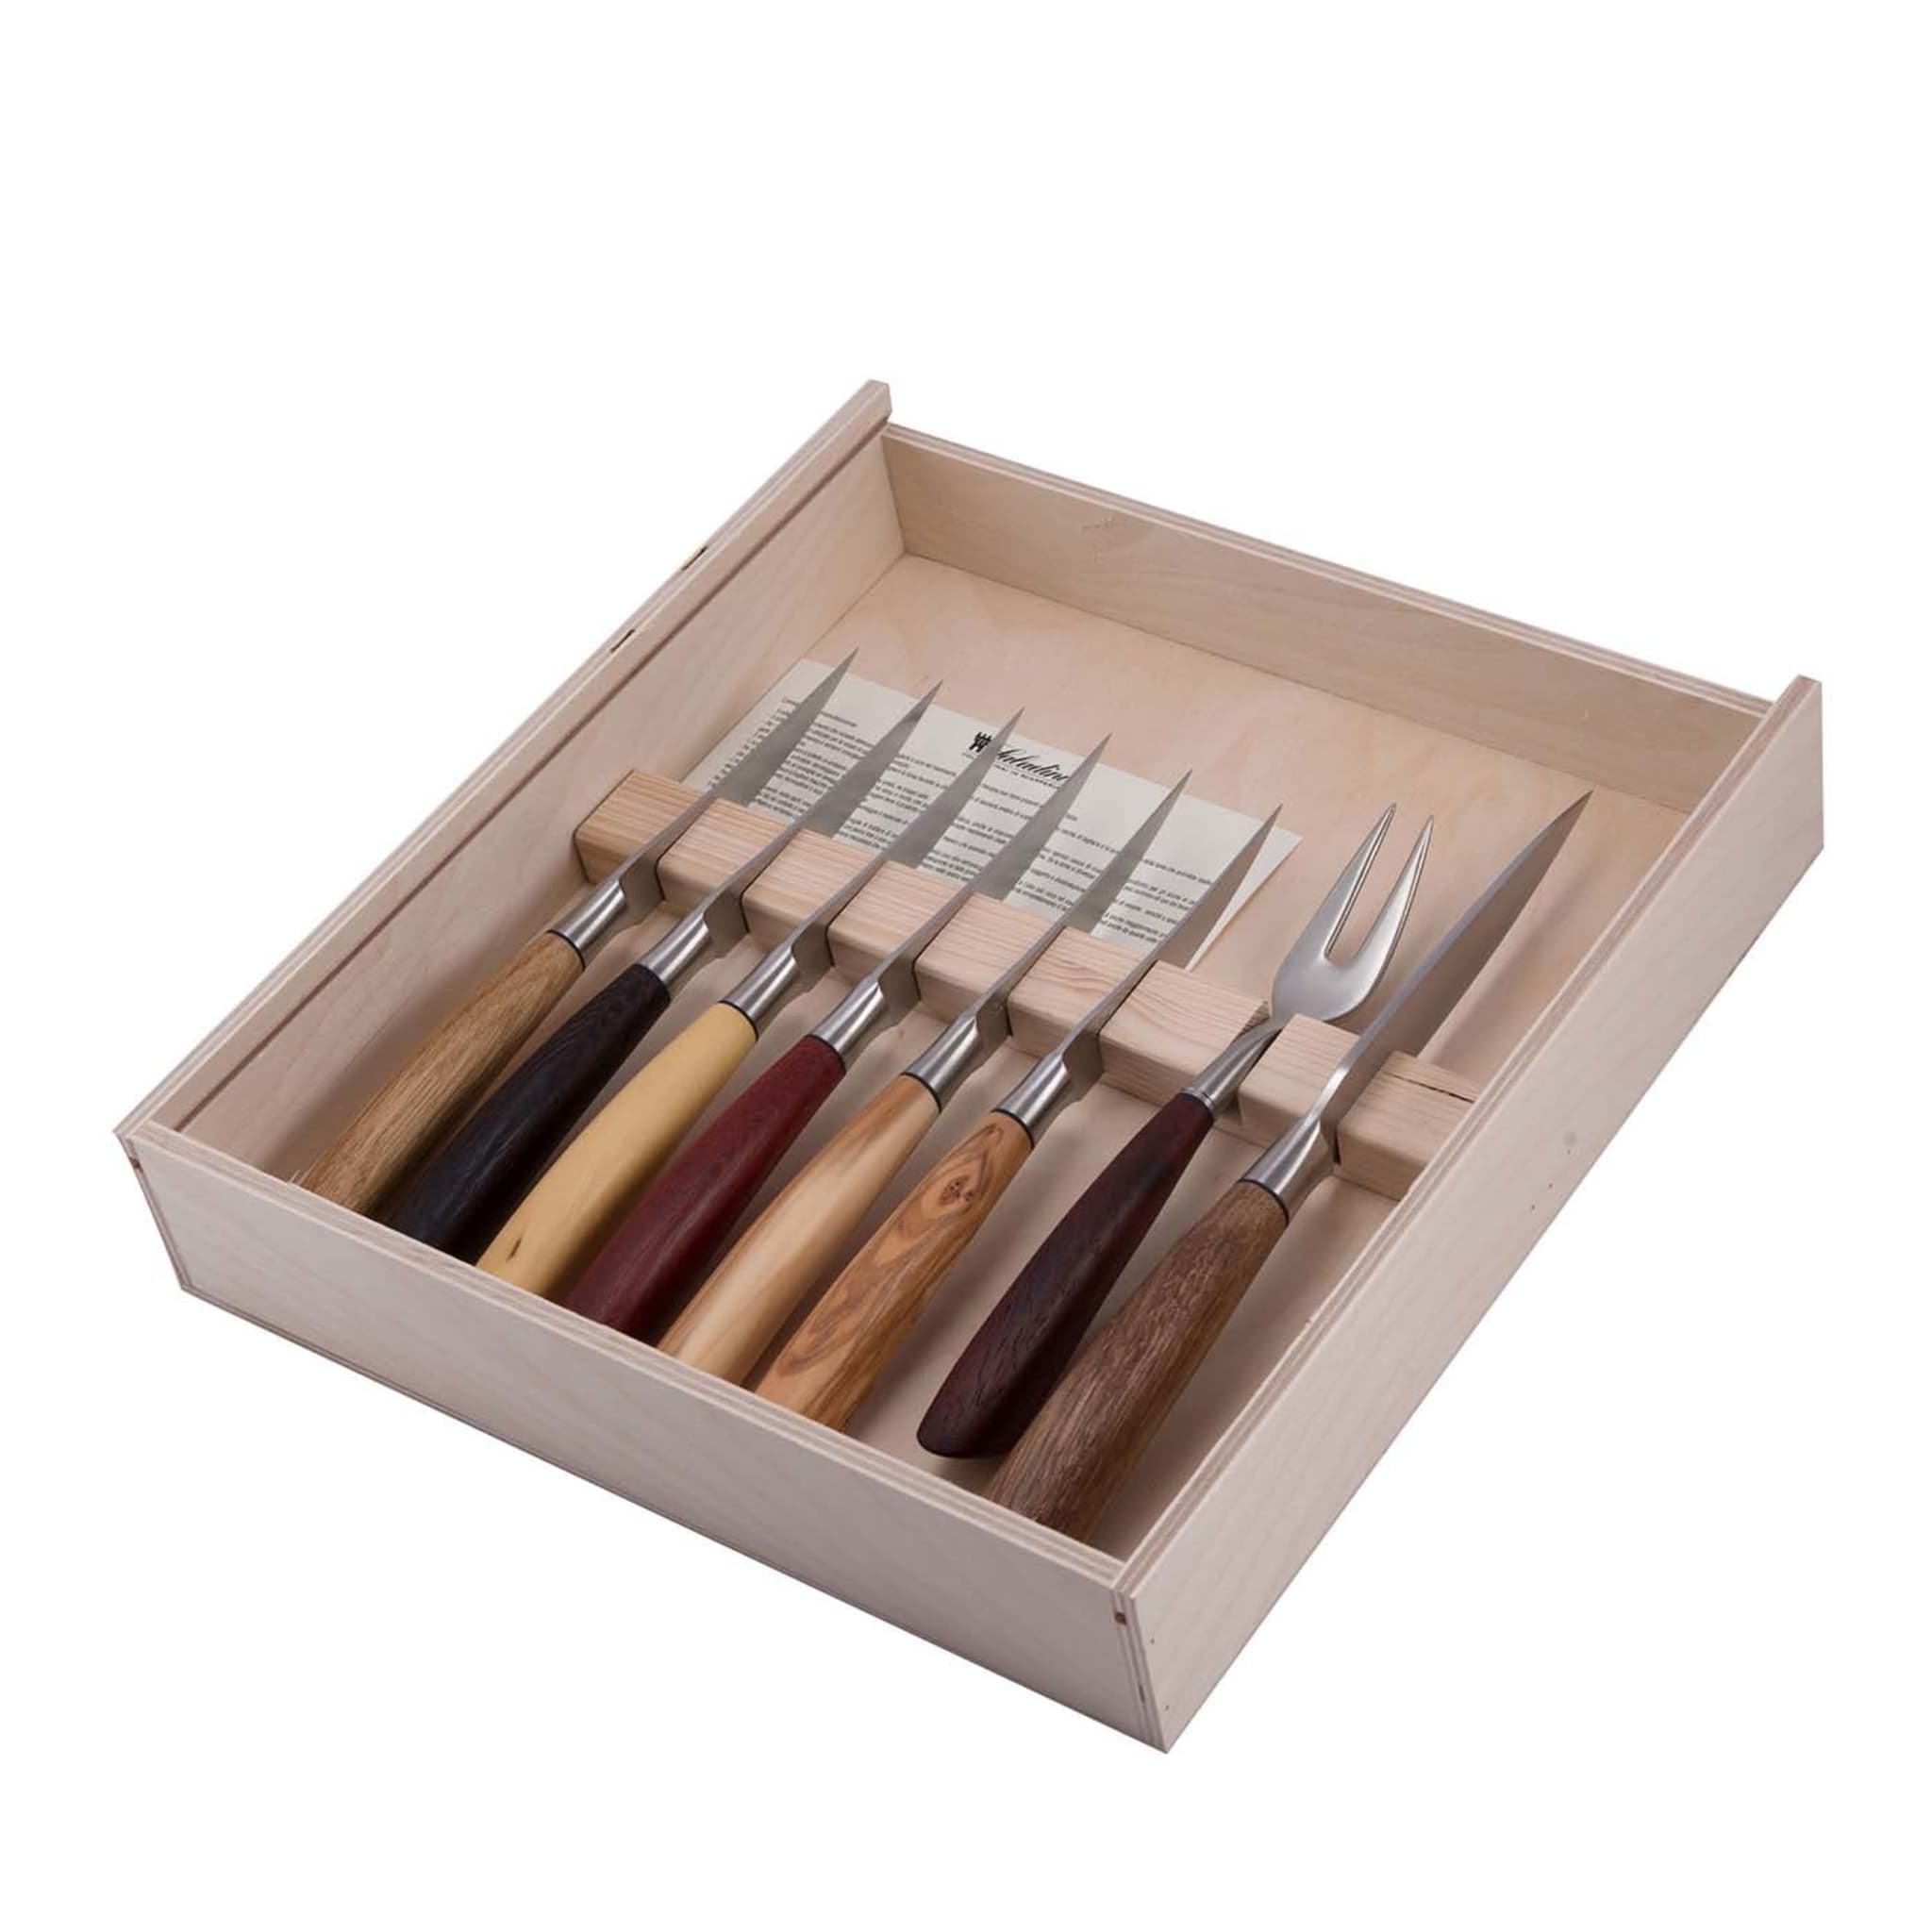 Set of 7 Steak Knives and 1 Serving Fork - Main view